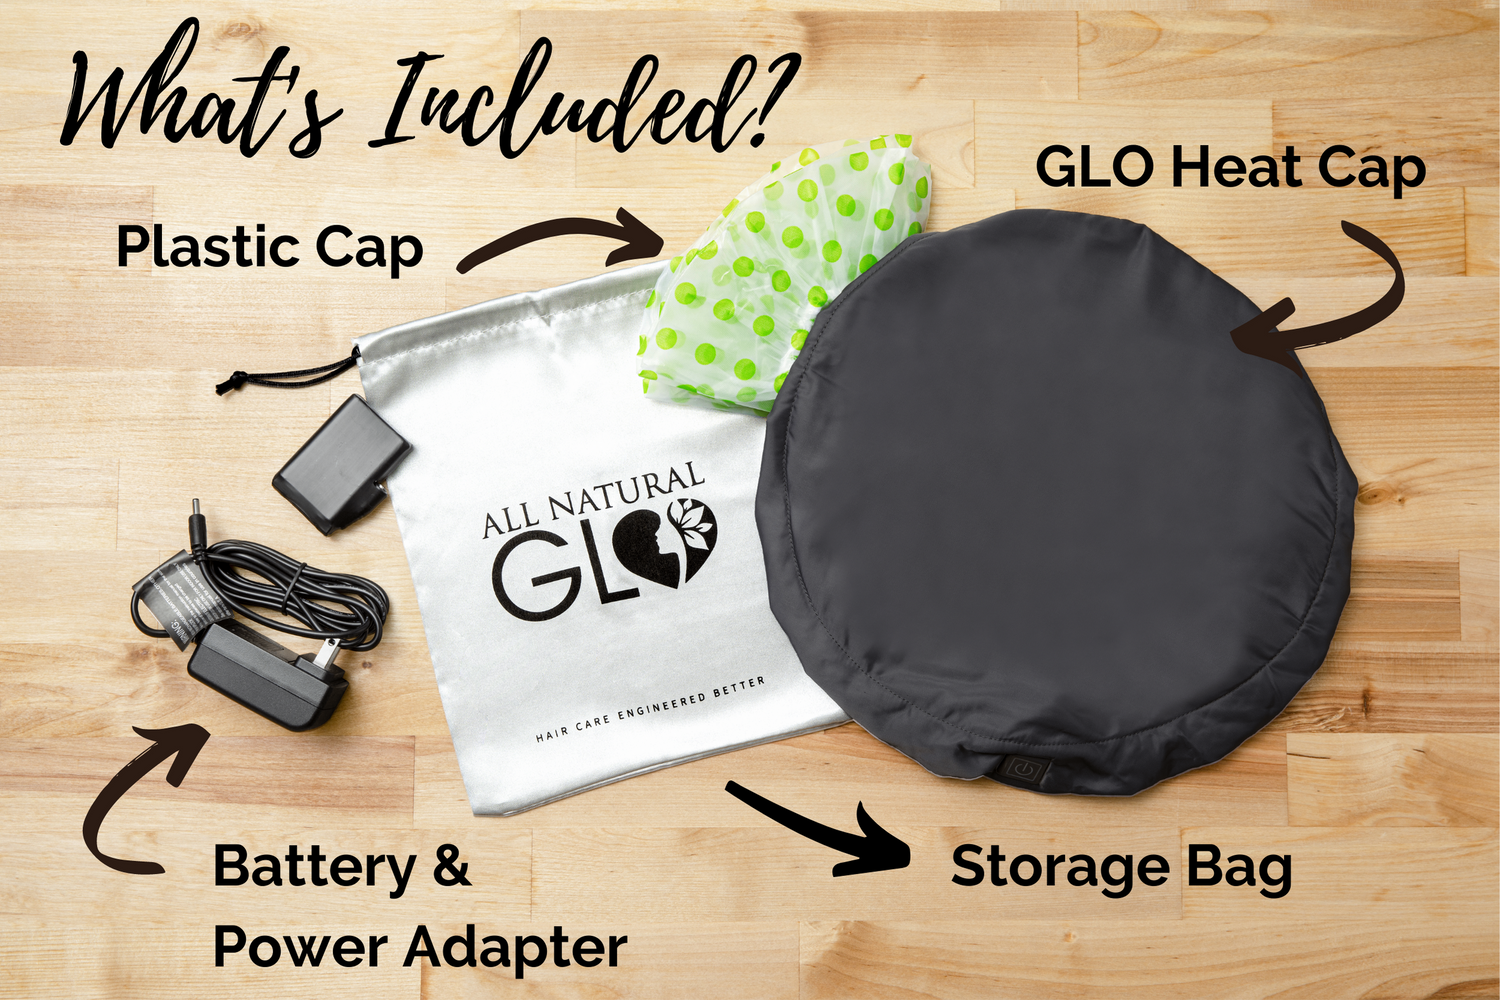 All Natural GLO - GLO Heat Cap (Upgraded) - All Natural GLO